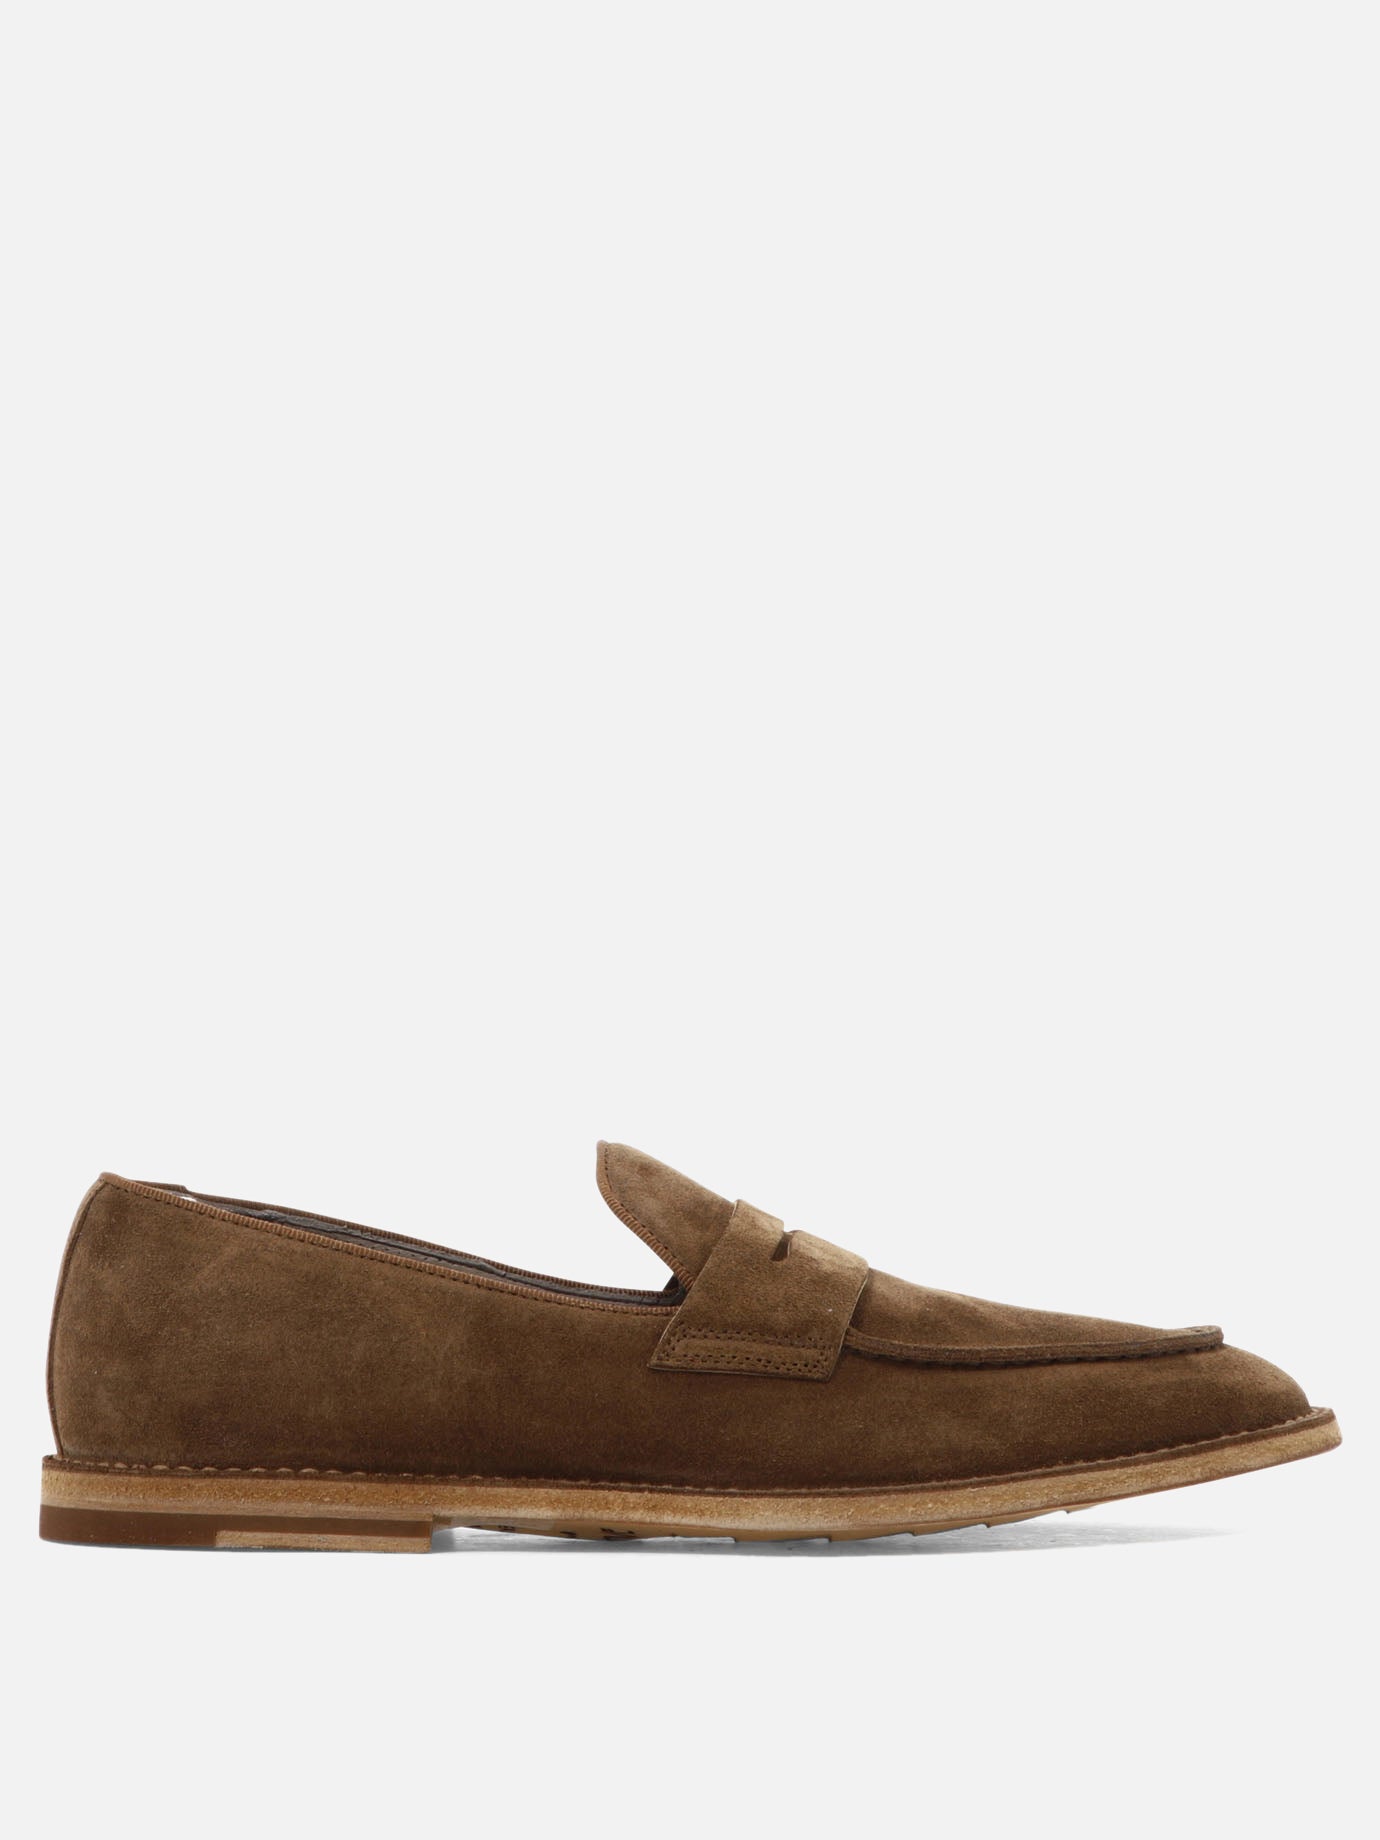 "Steple" loafers